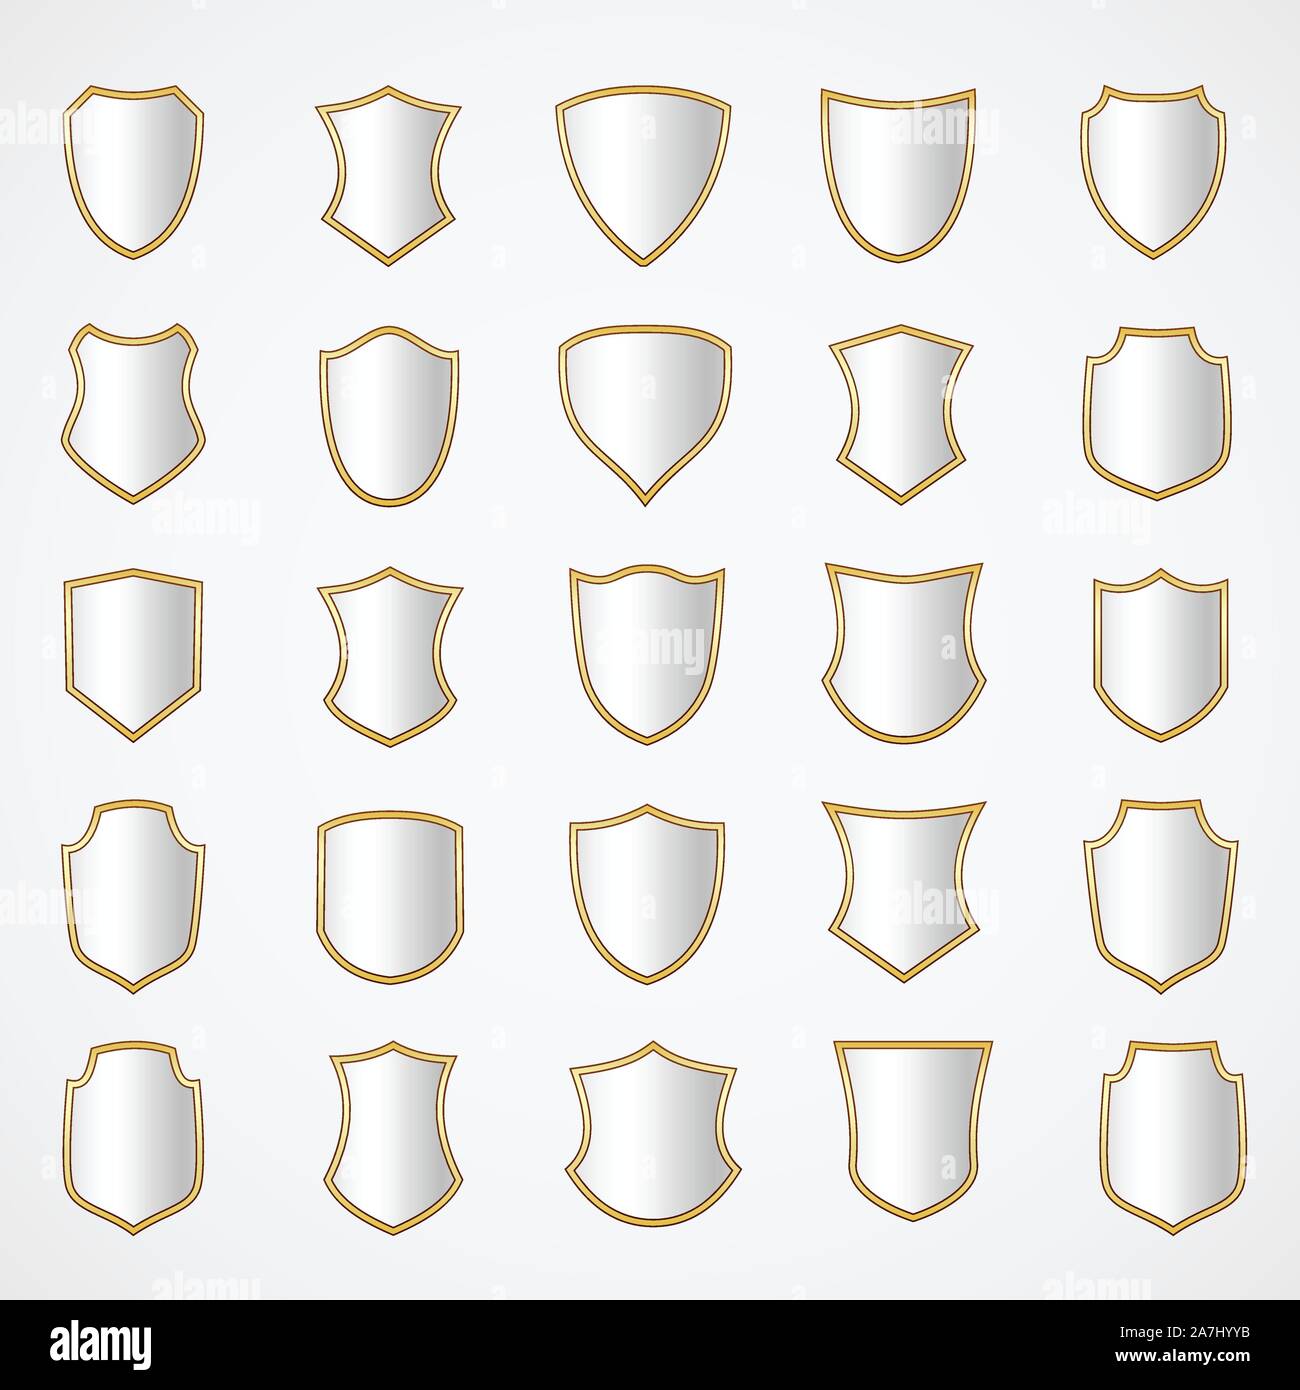 Silver shield design set with various shapes. Stock Vector